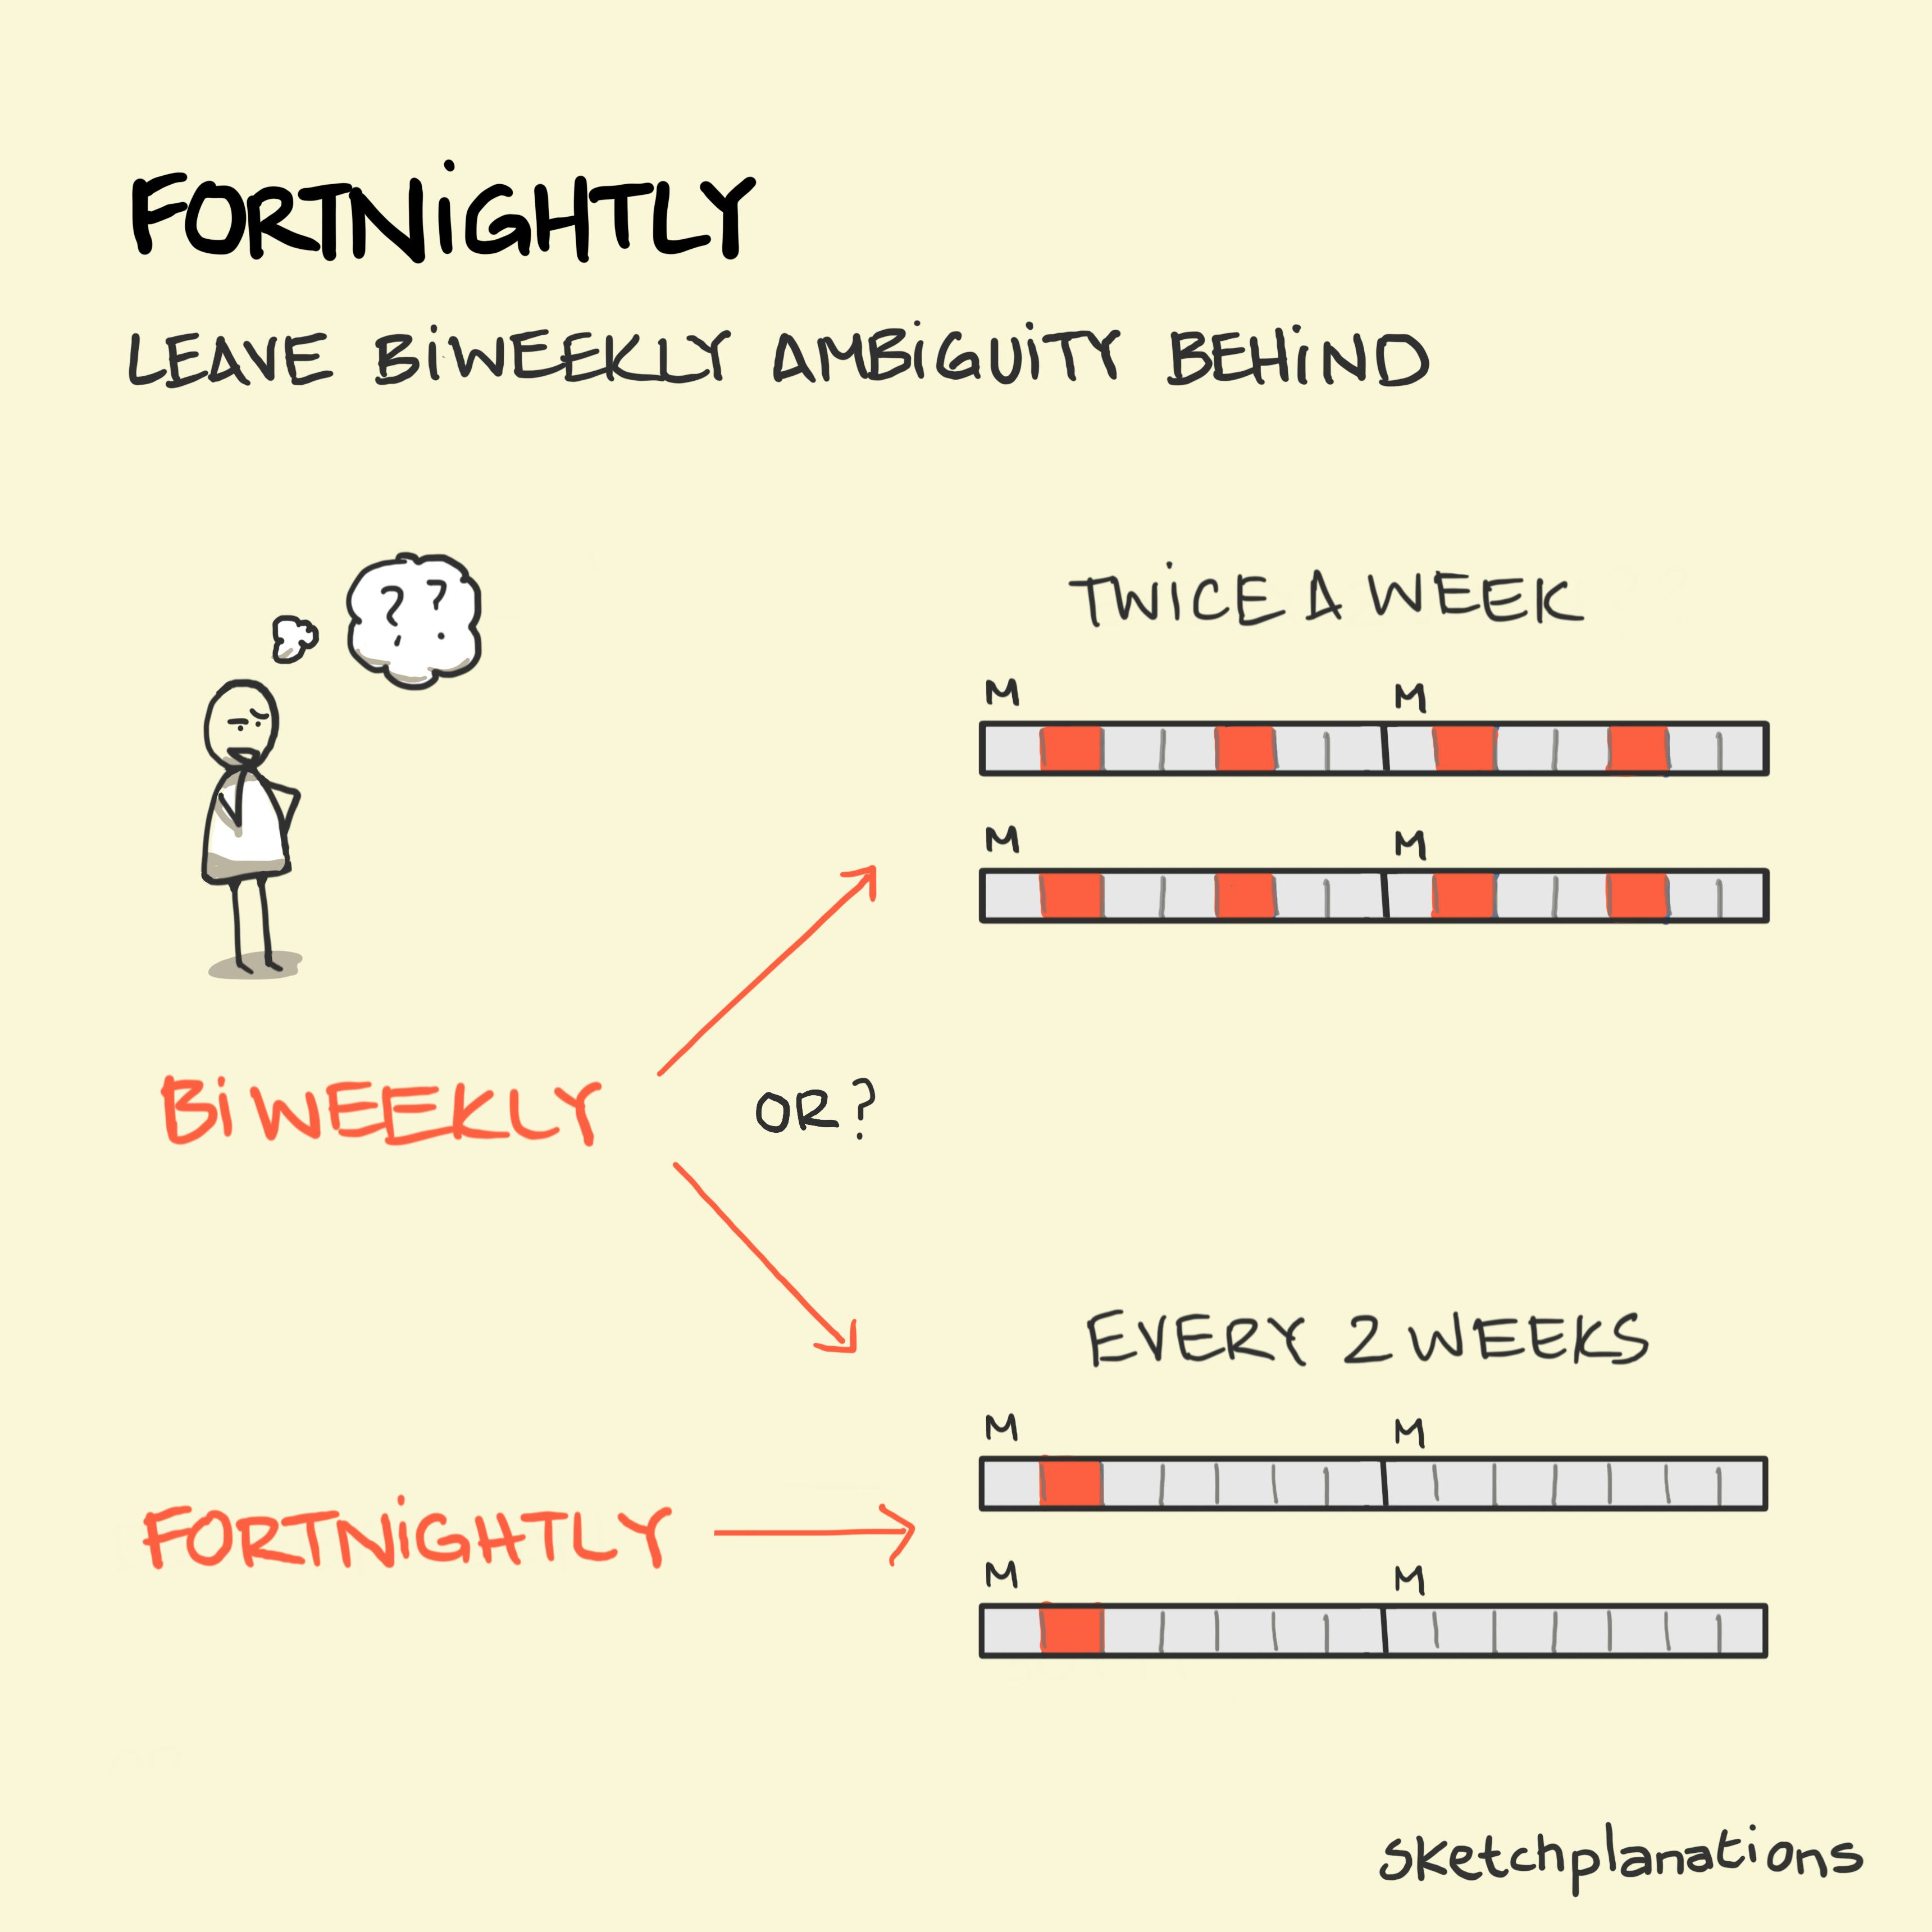 Fortnightly: a person considers whether 'biweekly' really means "twice a week" or "every two weeks" and resolves to use fortnightly for "every two weeks" in the future.